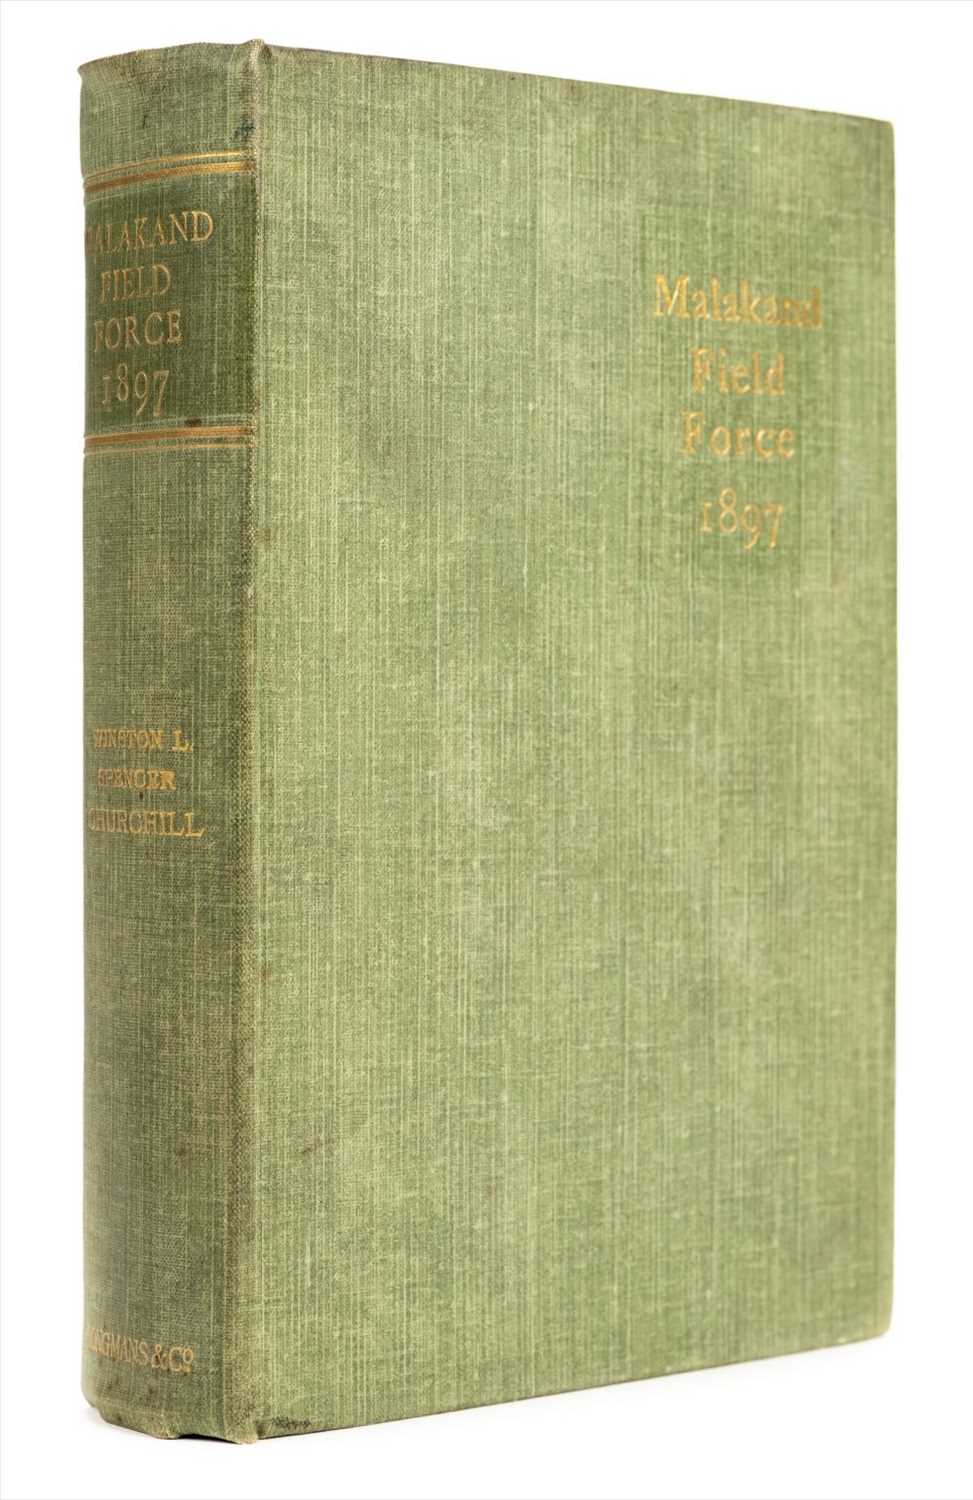 Lot 148 - Churchill (Winston Spencer). The Story of the Malakand Field Force, 1898